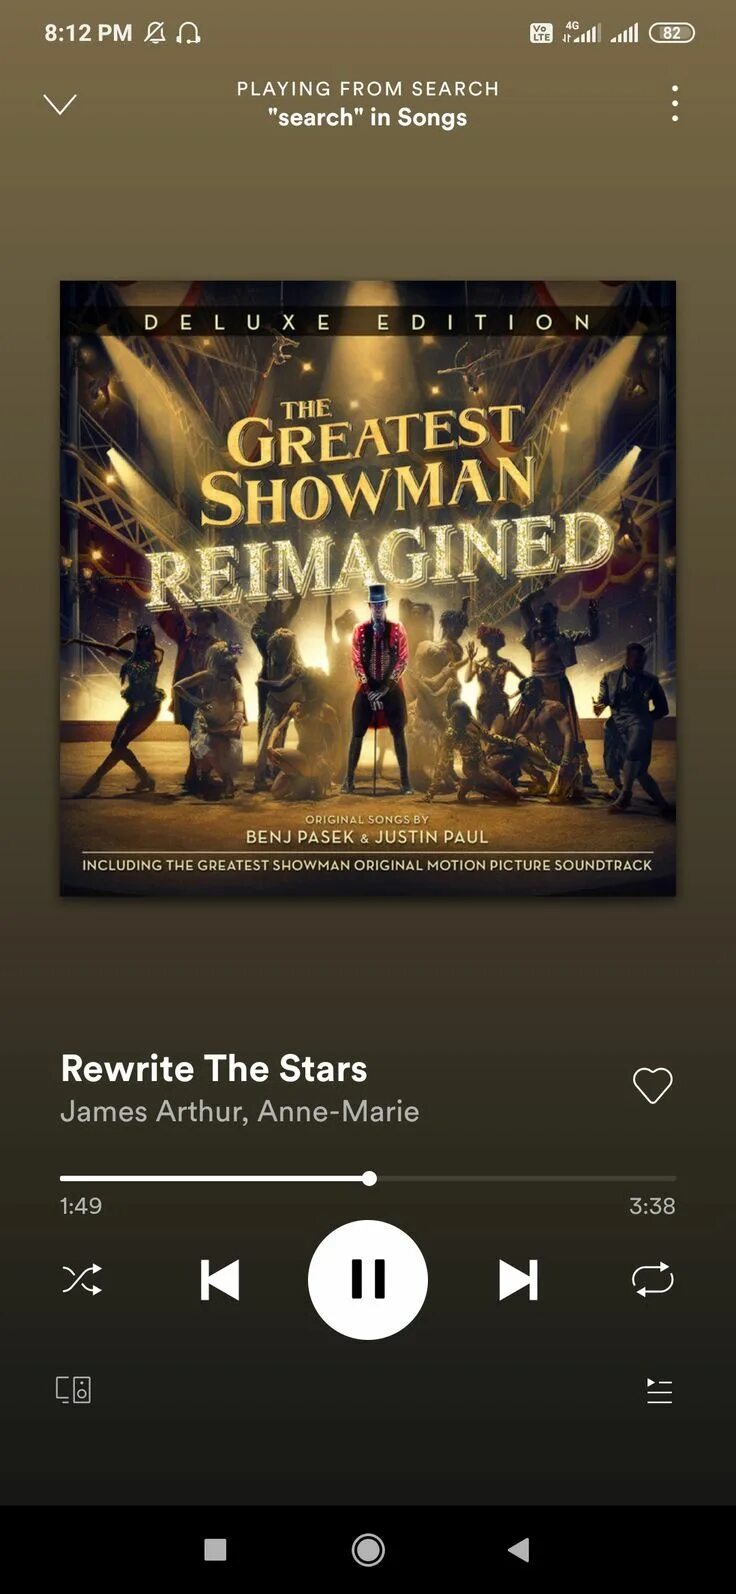 Anne-Marie James Arthur Rewrite the Stars [from the Greatest Showman: reimagined]. Rewrite the Stars текст. Rewrite the Stars James Arthur. Rewrite the Stars оригинал.